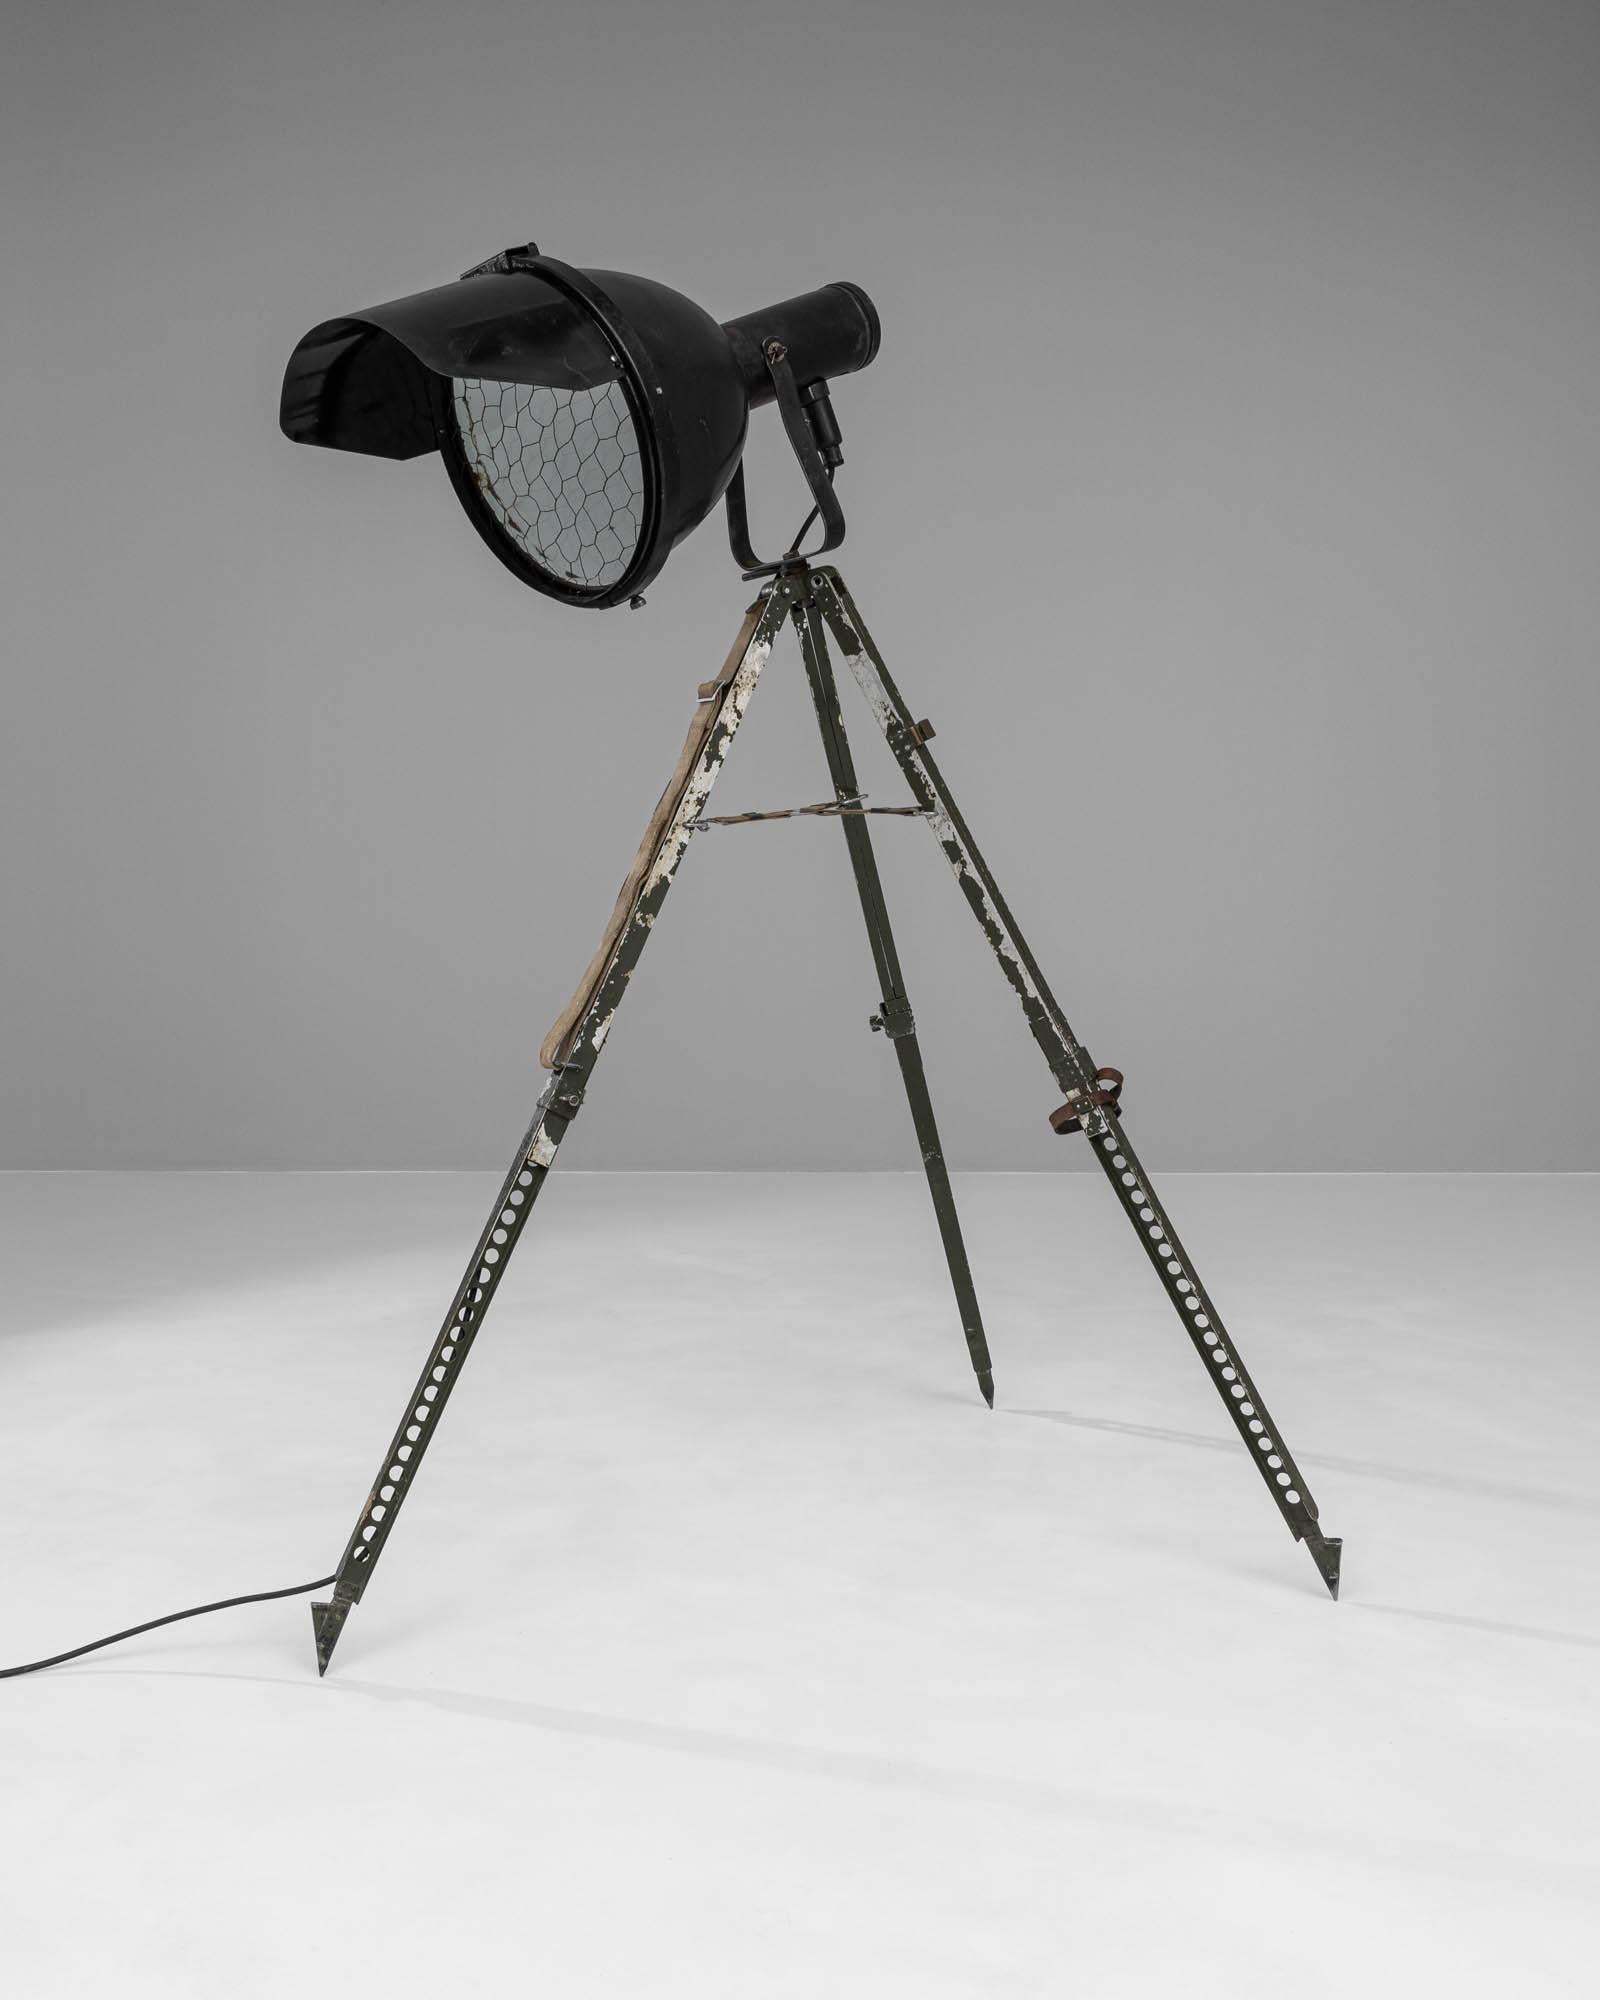 Step into the spotlight with this striking 20th Century Czech Metal Floor Lamp, a stellar fusion of form and function. Crafted during a time when durability met design, this floor lamp boasts a robust, military-green tripod base that carries the